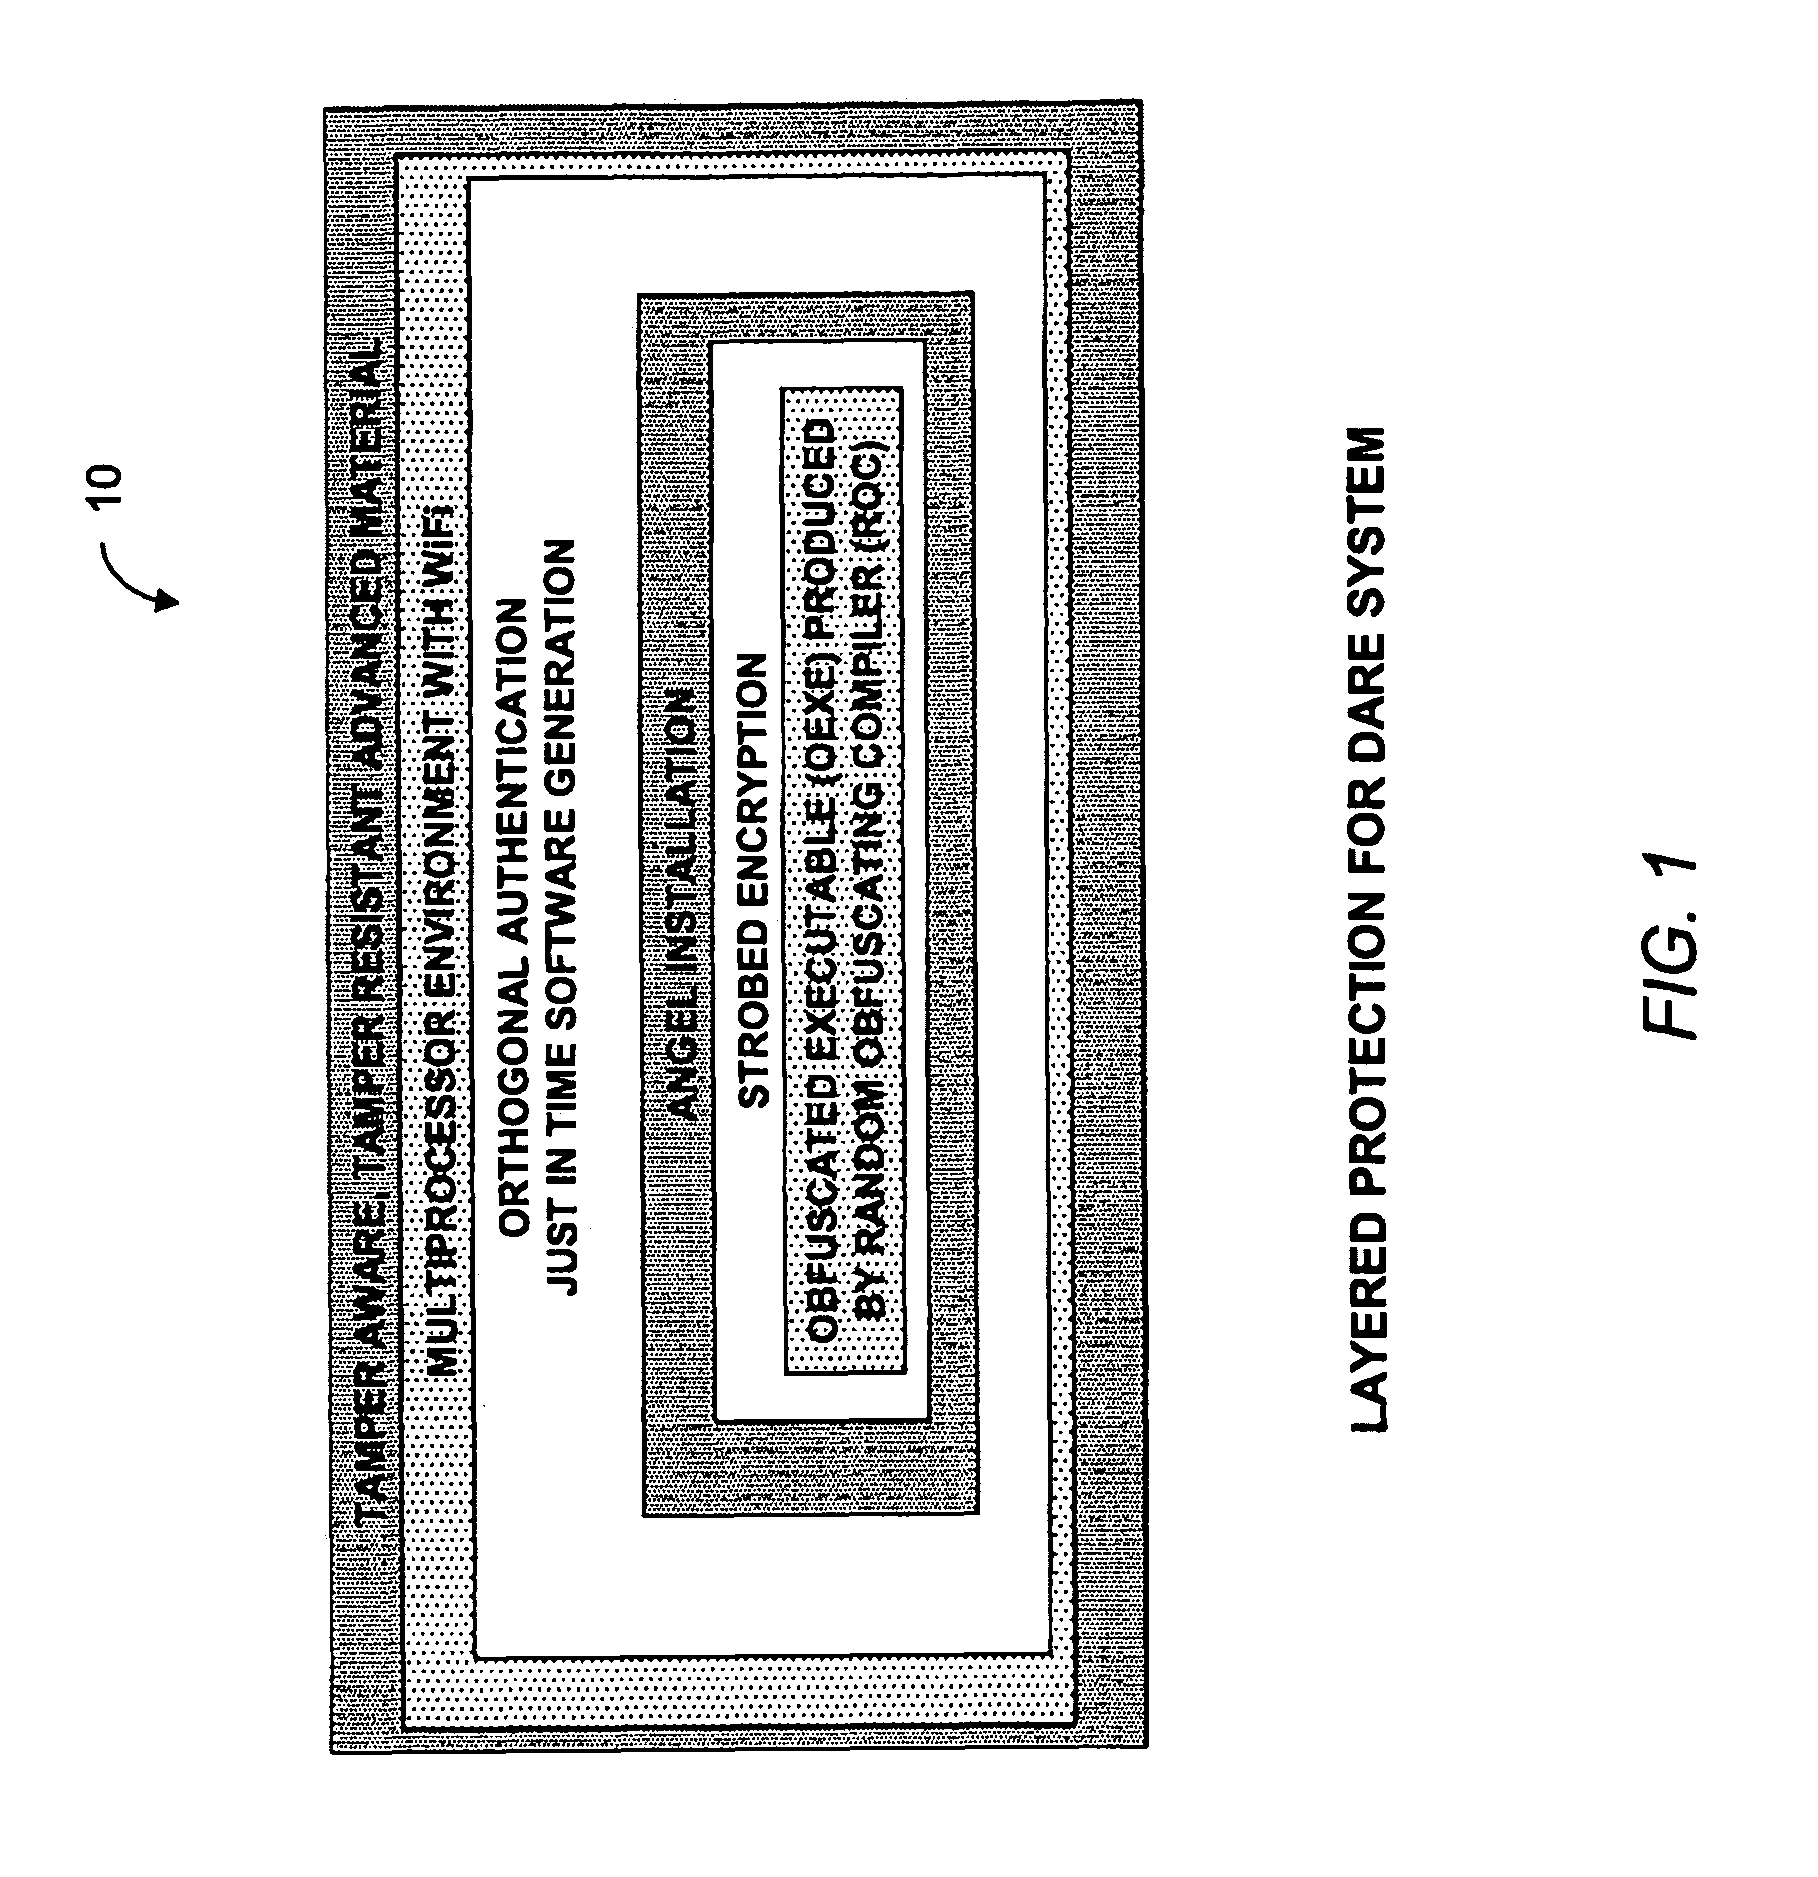 System and method for defending against reverse engineering of software, firmware and hardware